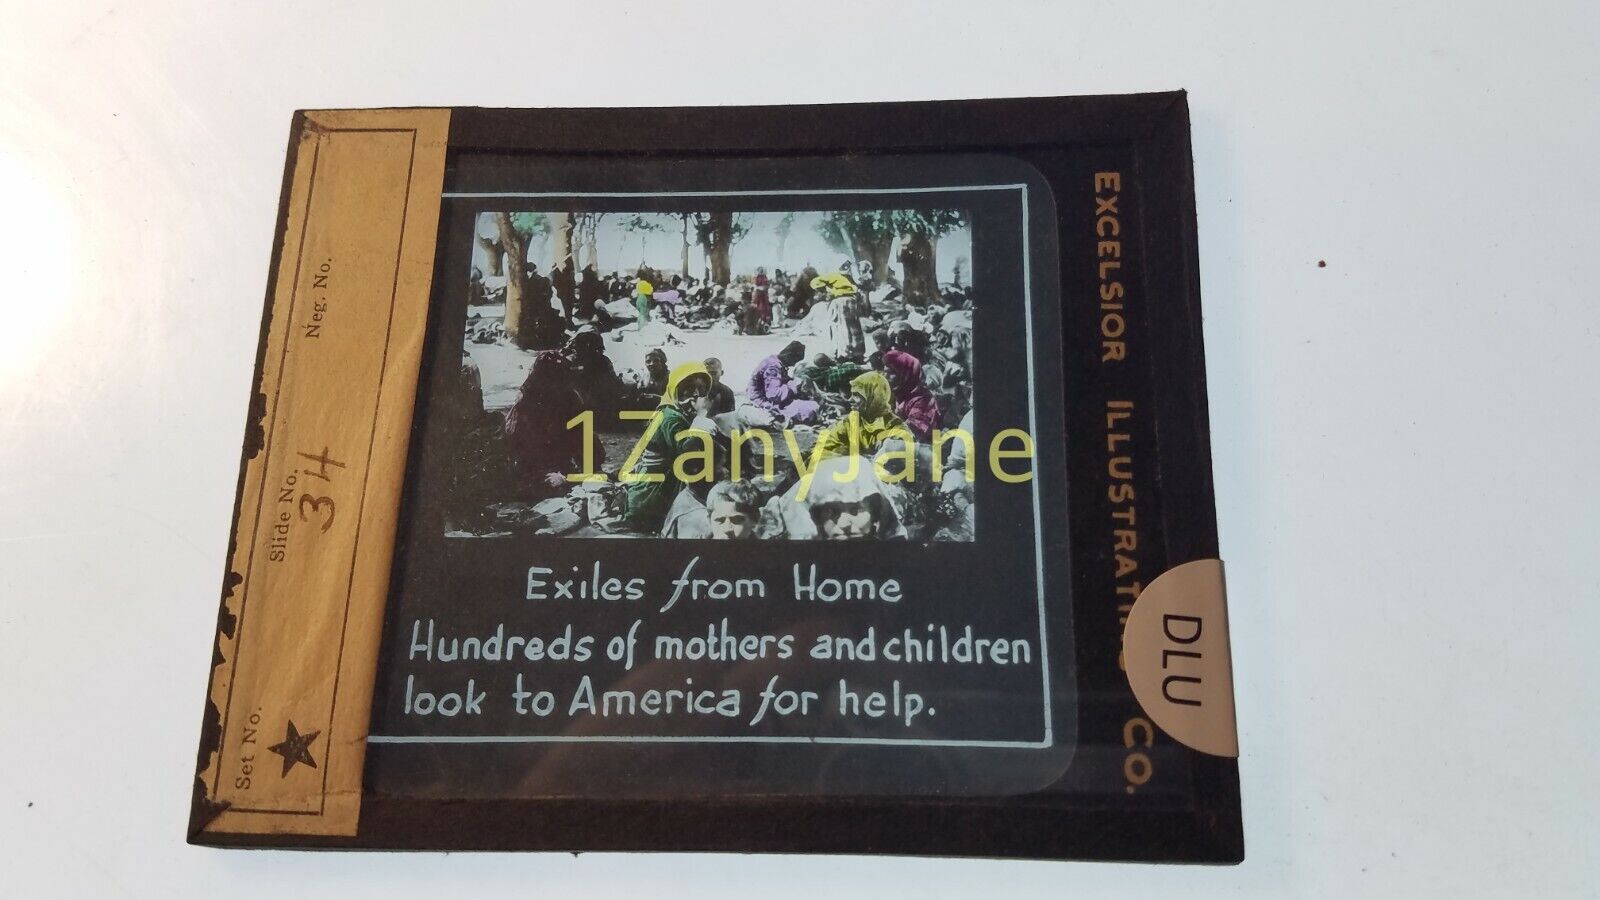 DLU Glass Magic Lantern Slide Photo EXILES FROM HOME HUNDREDS MOTHERS